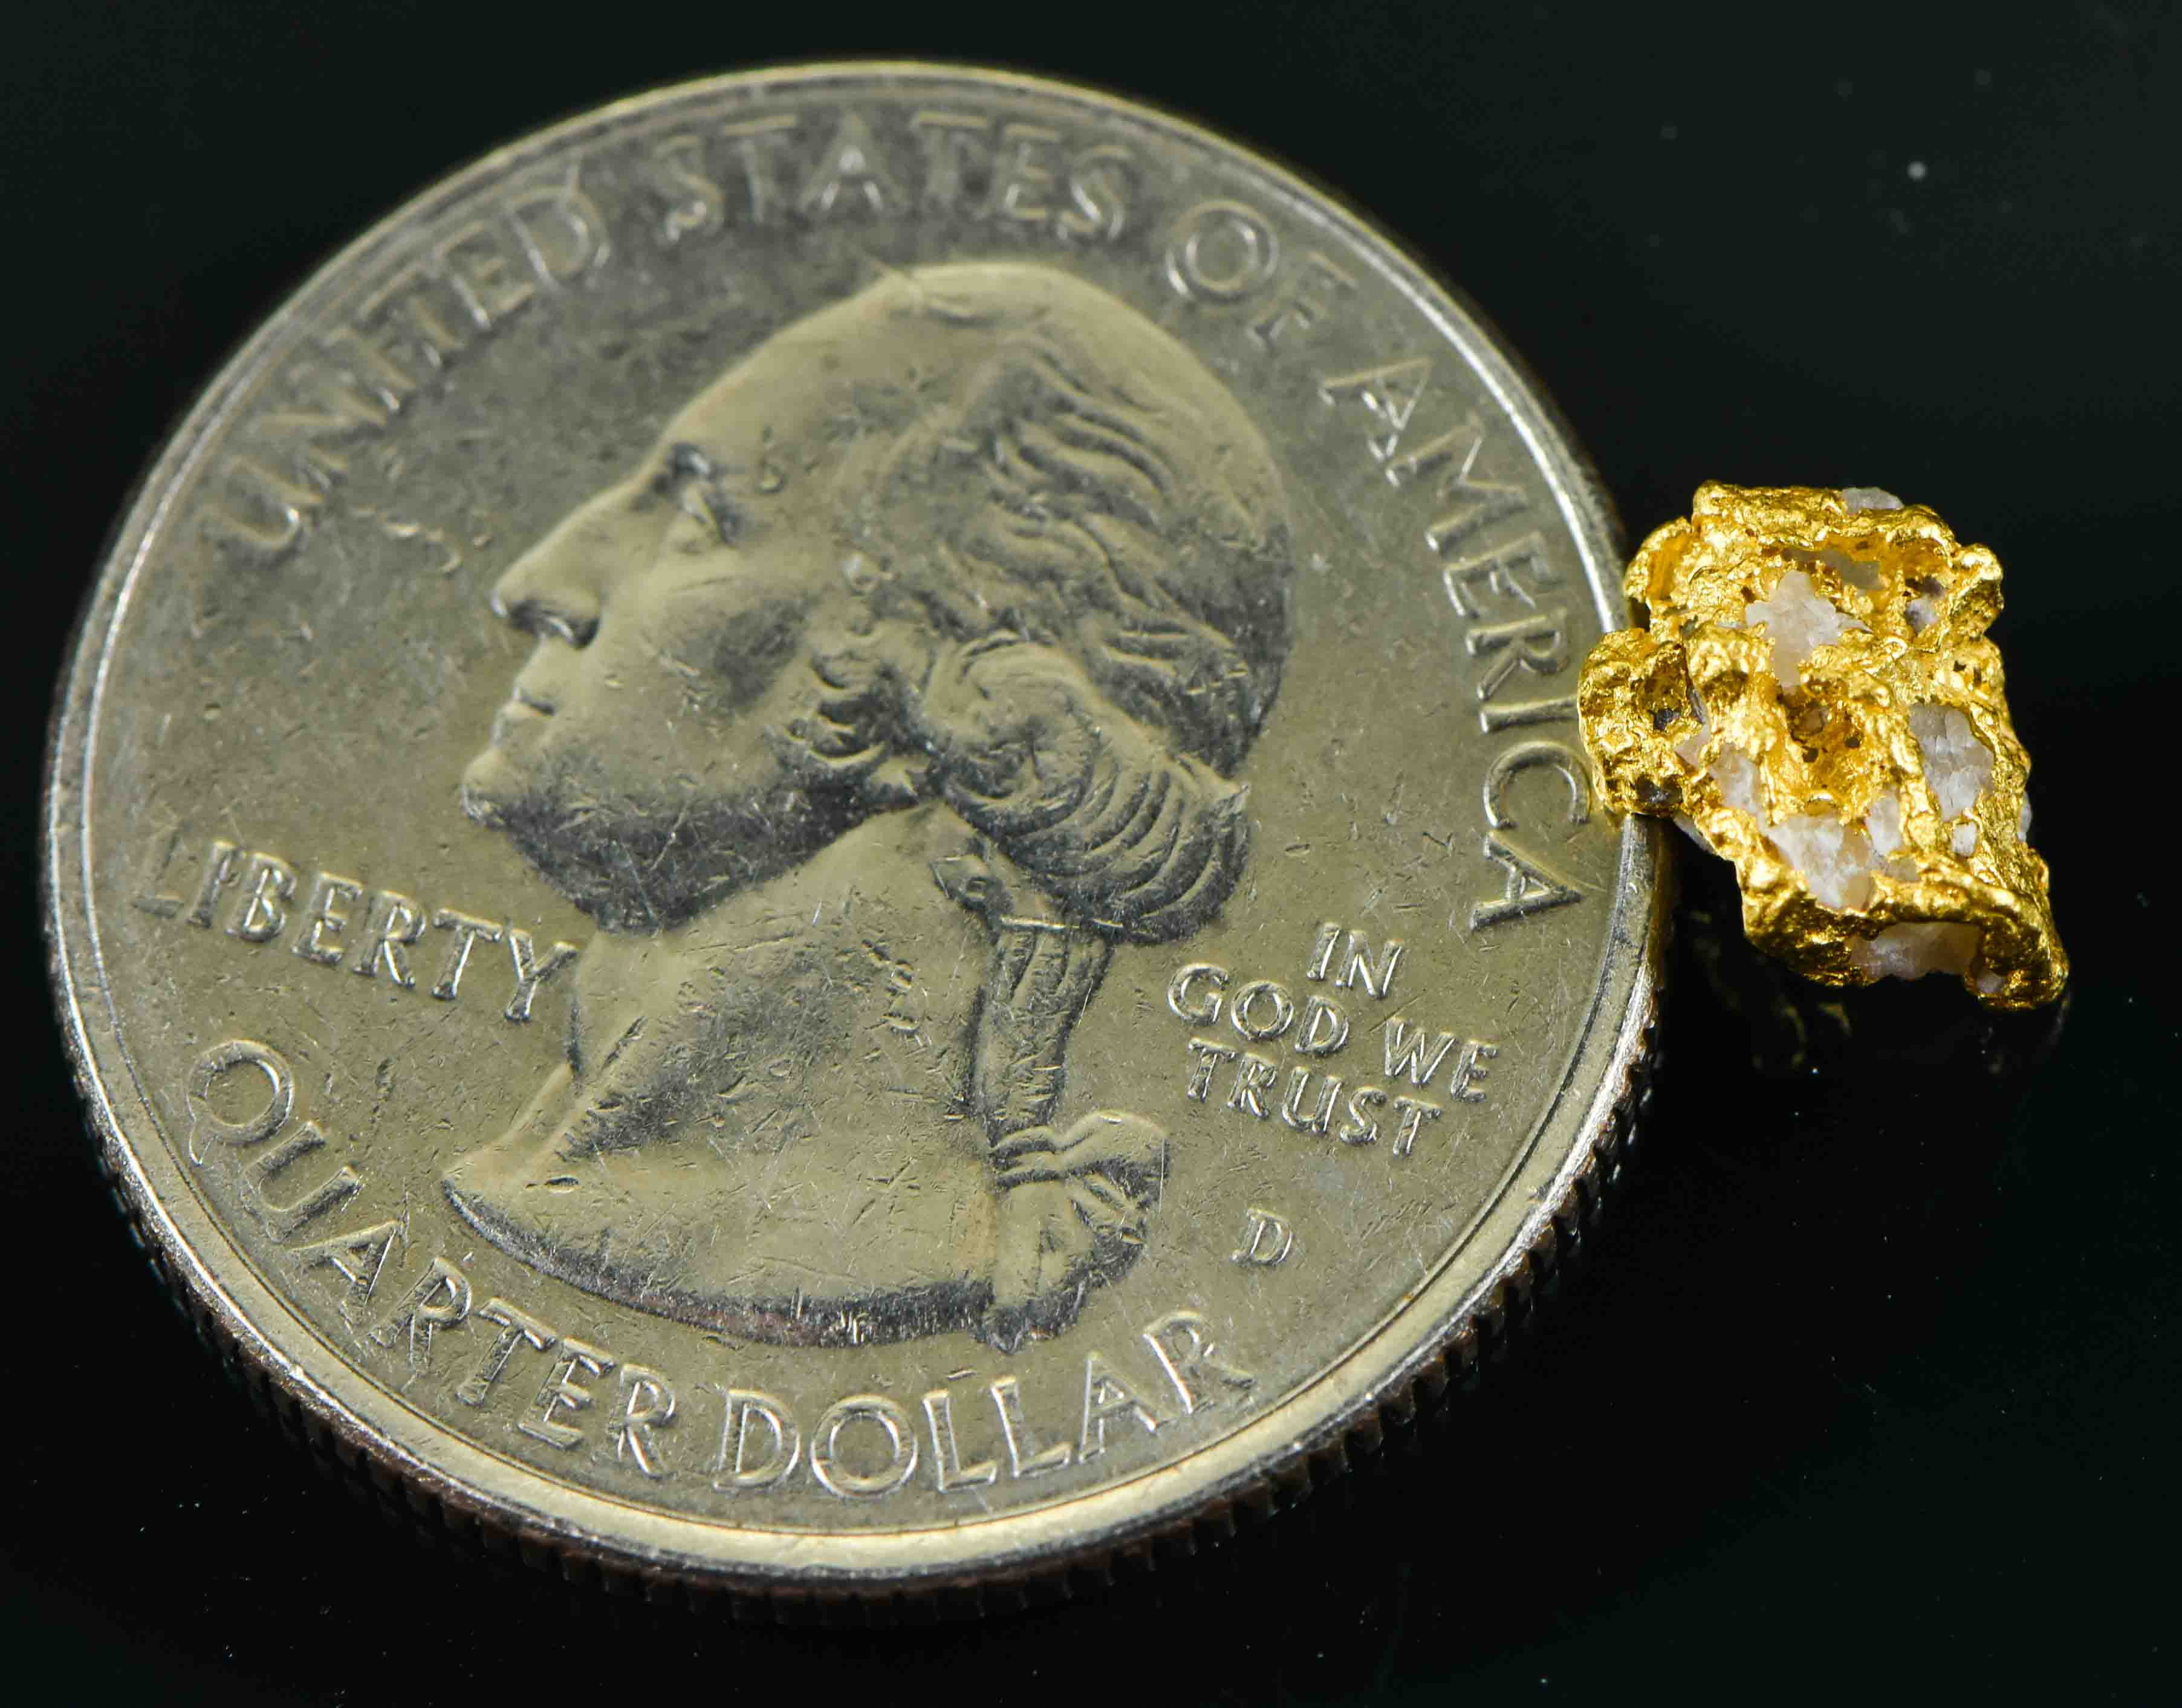 #20 Australian Natural Gold Nugget With Quartz Weighs .61 Grams.